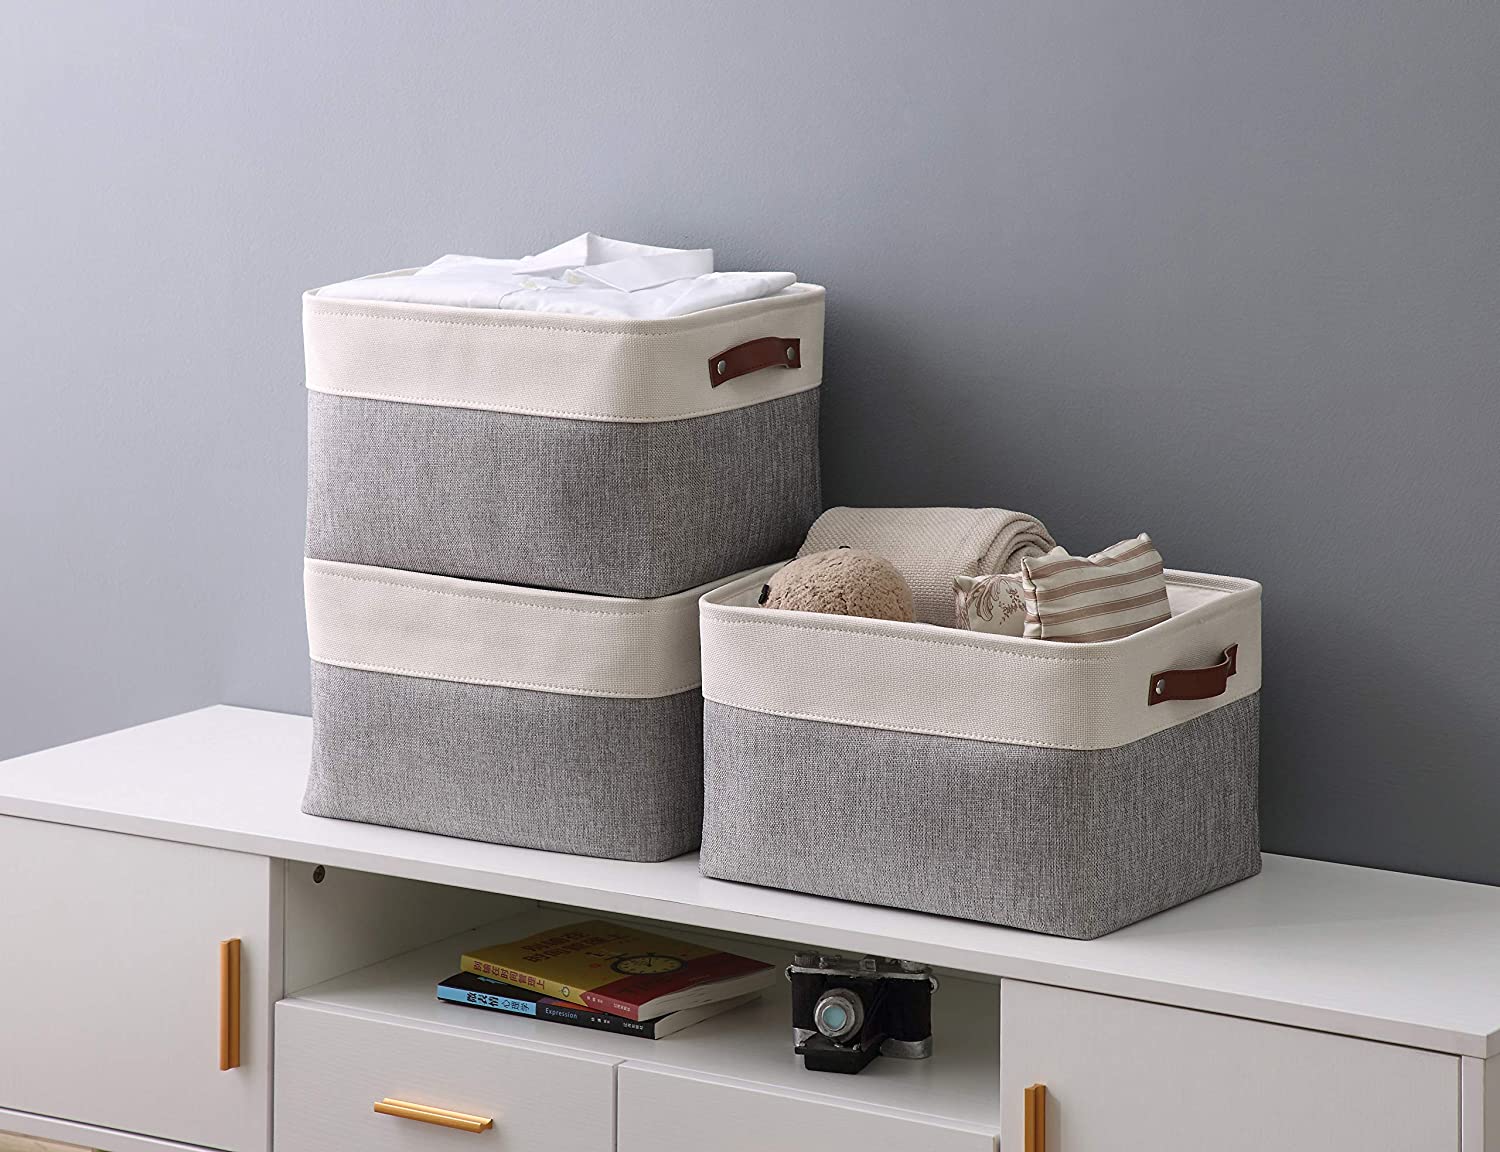 https://www.home-designing.com/wp-content/uploads/2020/10/simple-cloth-storage-bins-two-tone-cream-and-grey-leather-handles-stylish-home-organization-accessories.jpg